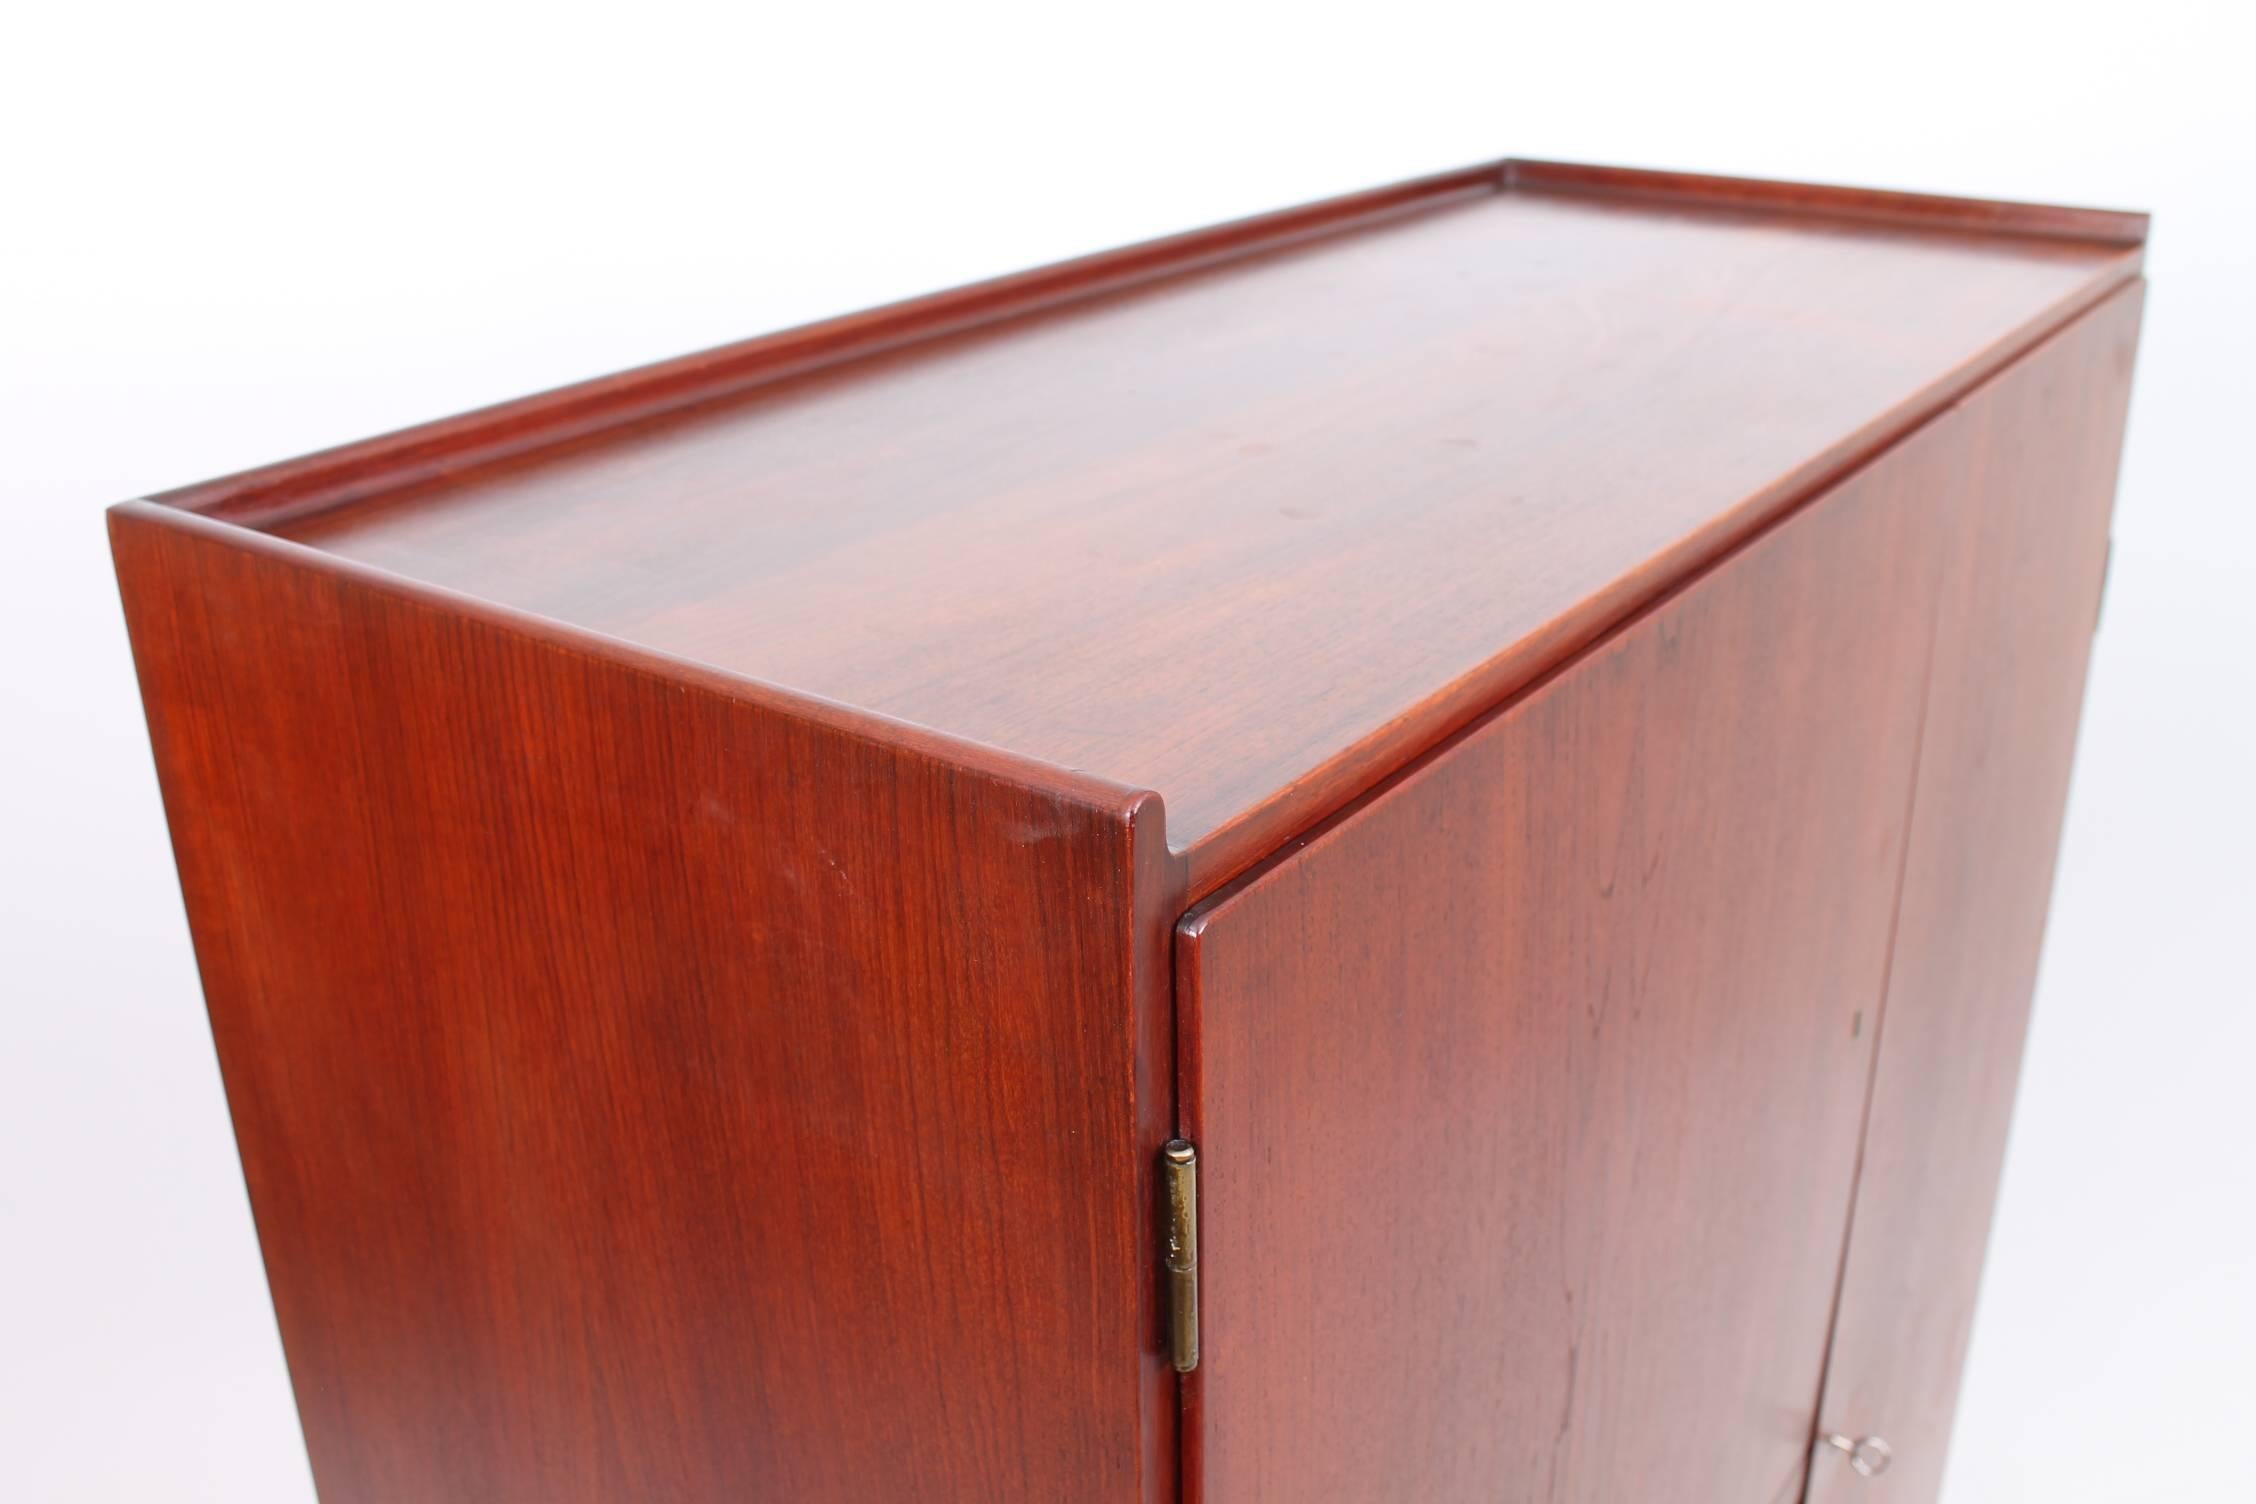 Beautiful, rare cabinet designed by Finn Juhl for Bovirke, circa the 1950s. The doors of the cabinet are made of teak and open to reveal adjustable and customizable shelving and drawers. The finished and stained interior of this piece is just as